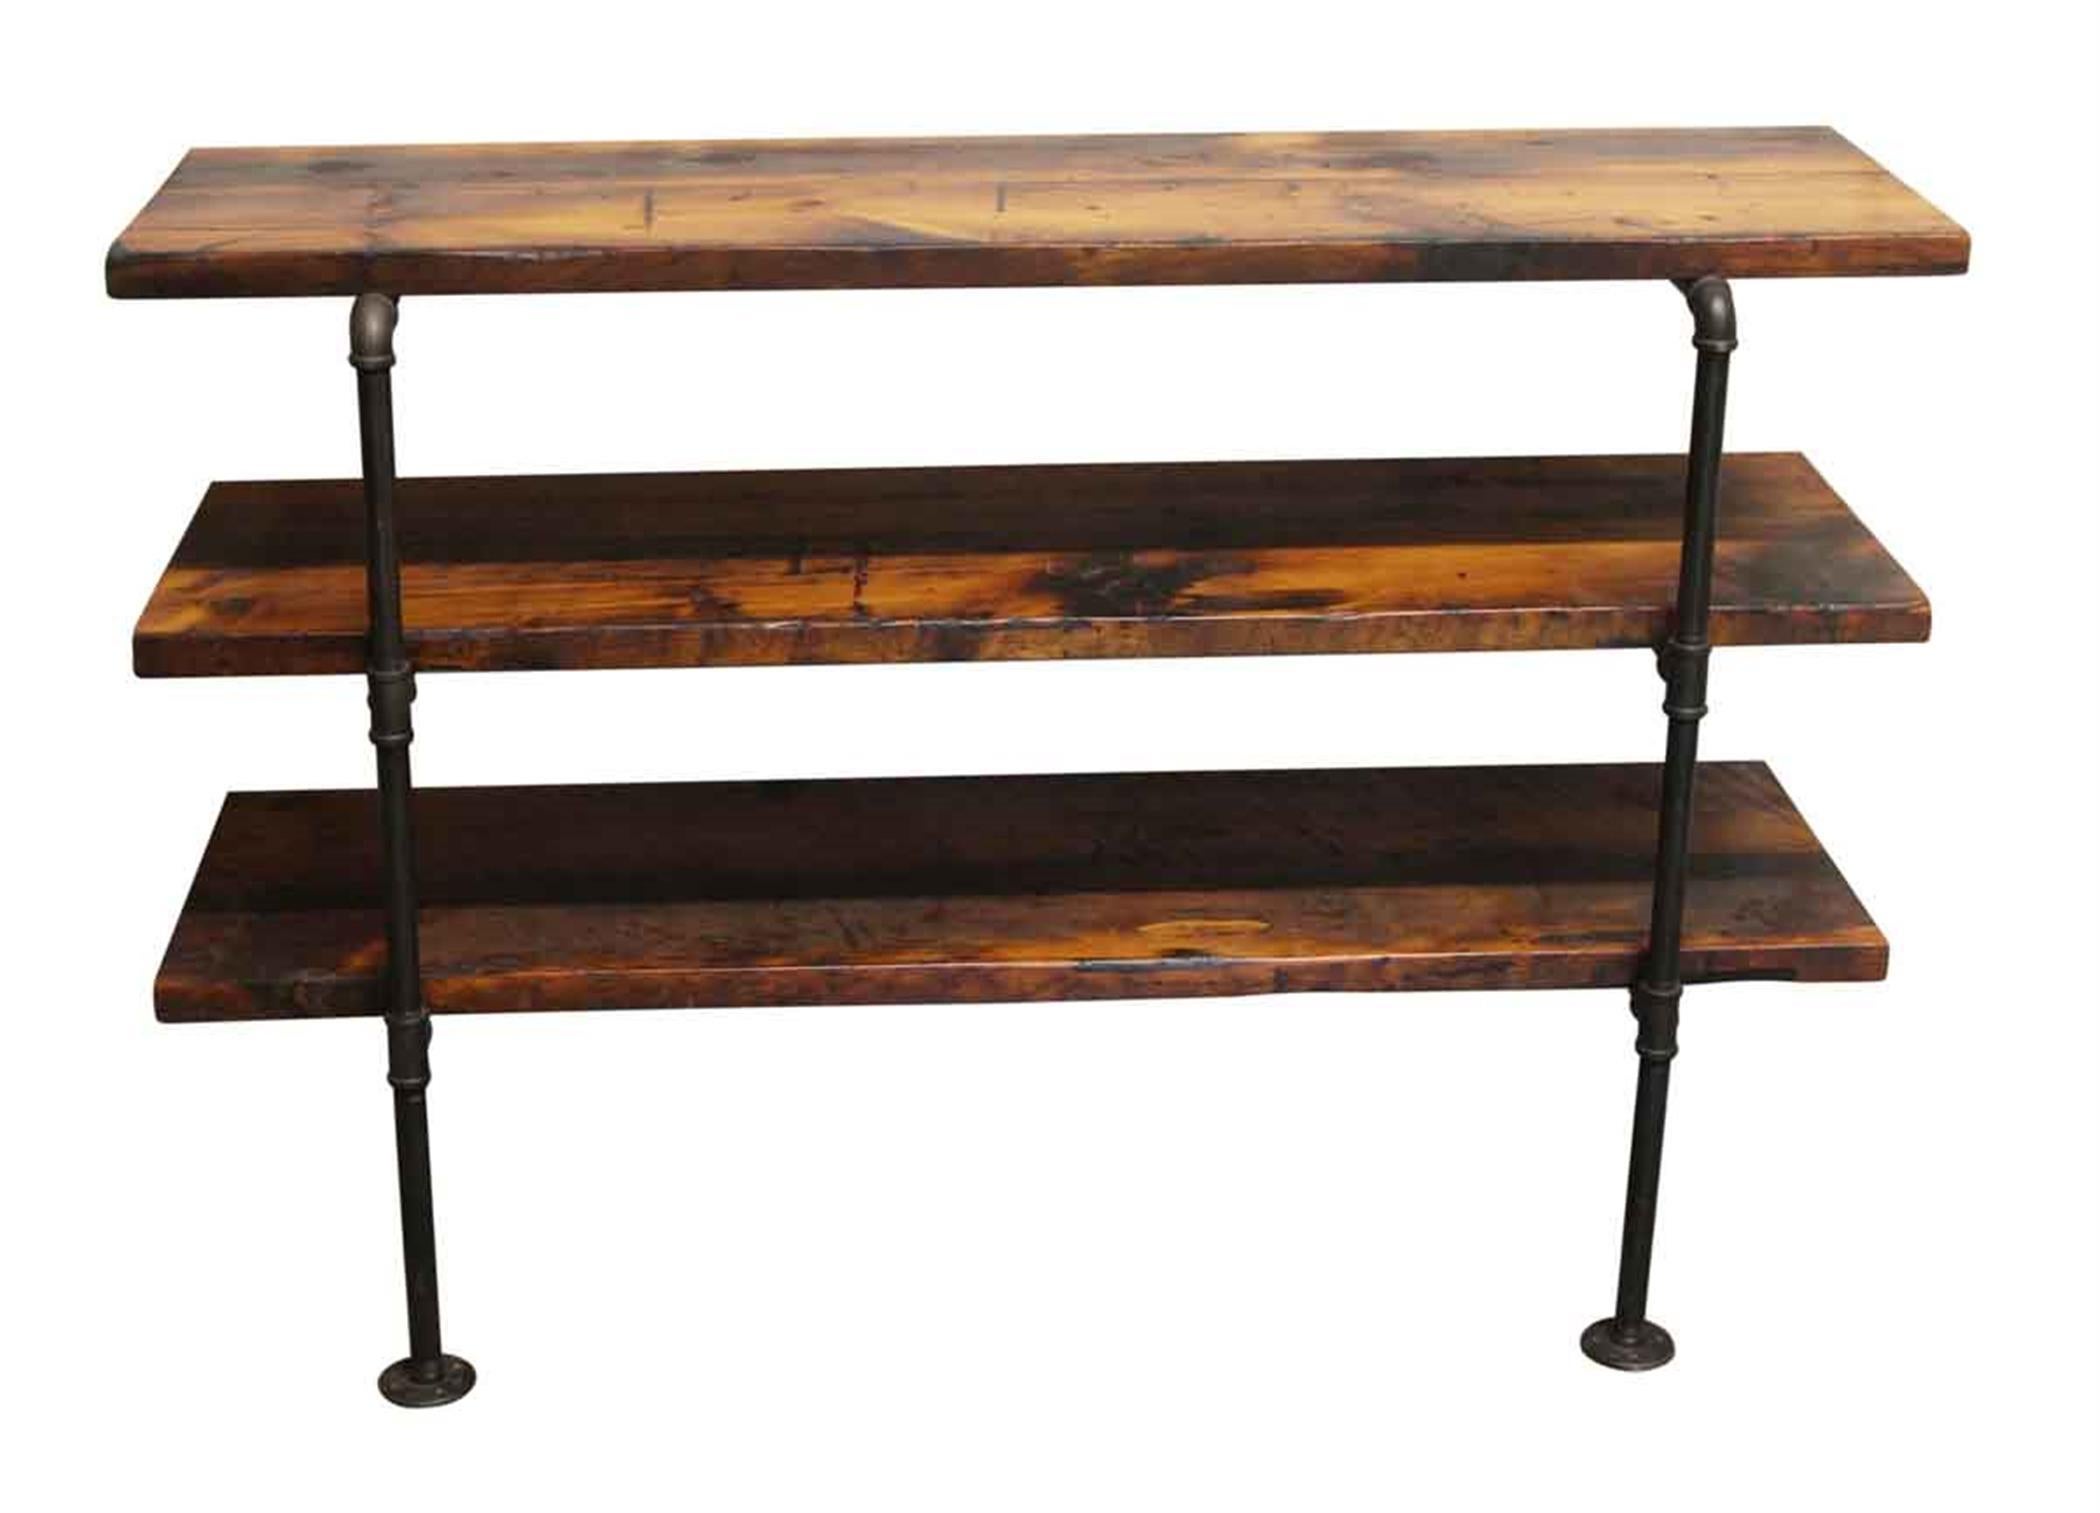 Dark wood tone three section pine wall mount shelf unit with black pipe legs. Must be mounted to a surface at the top and bottom. This can be seen at our 400 Gilligan St location in Scranton, PA.